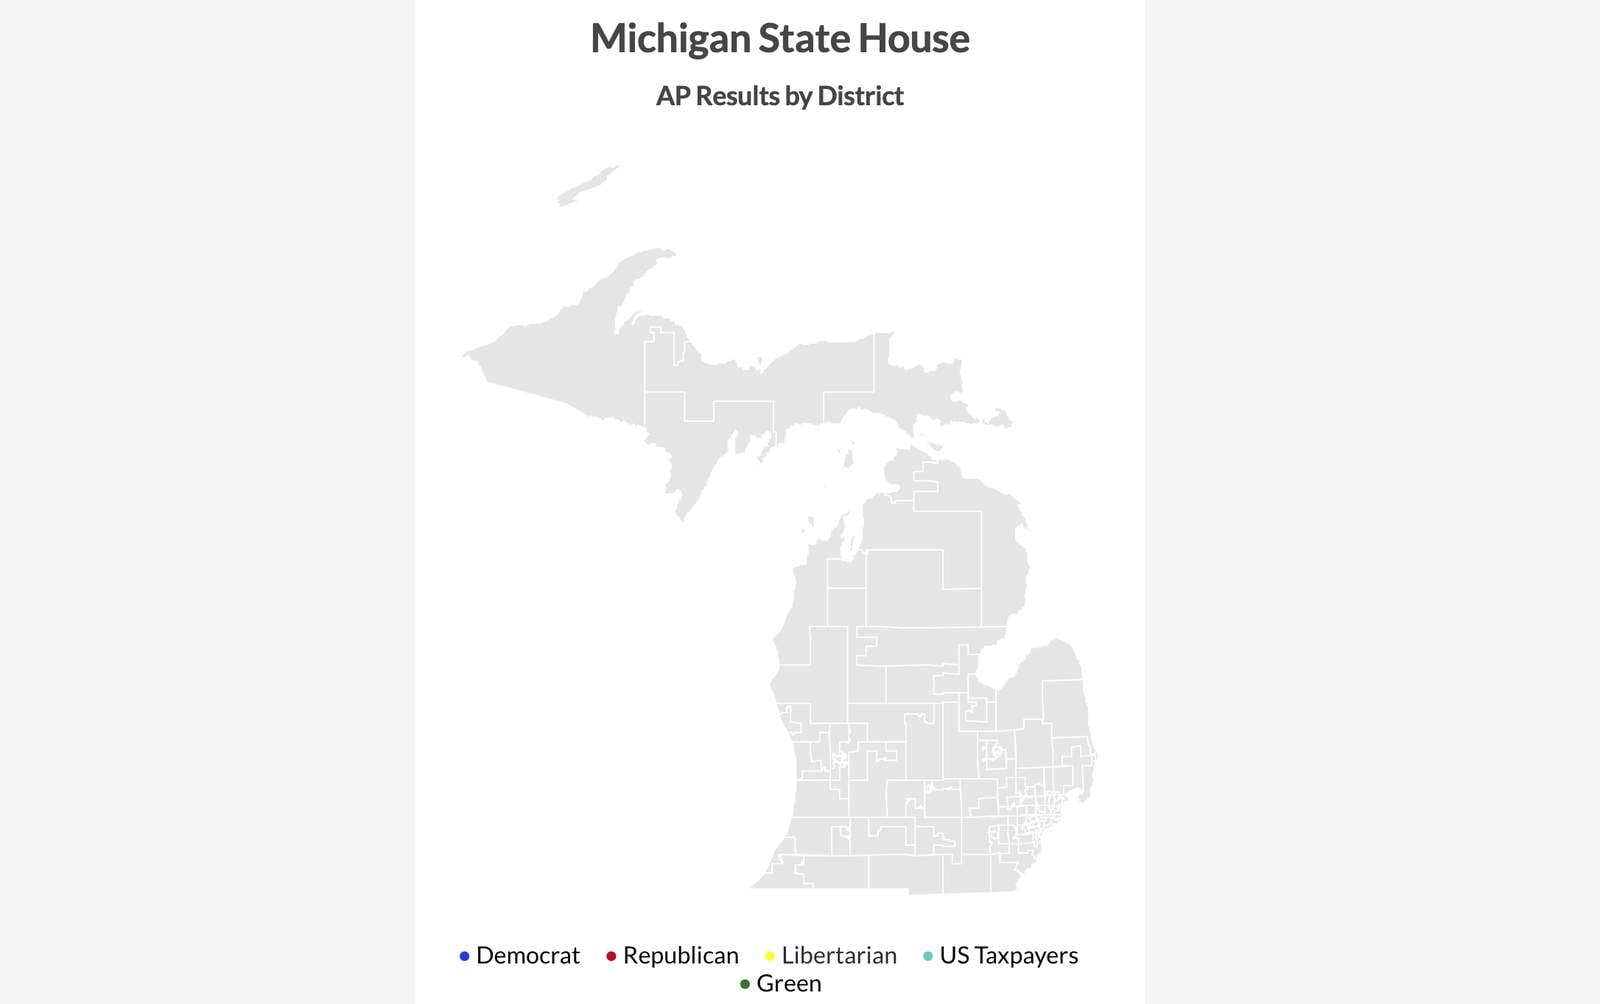 2020 election results: Michigan State House mapped by district